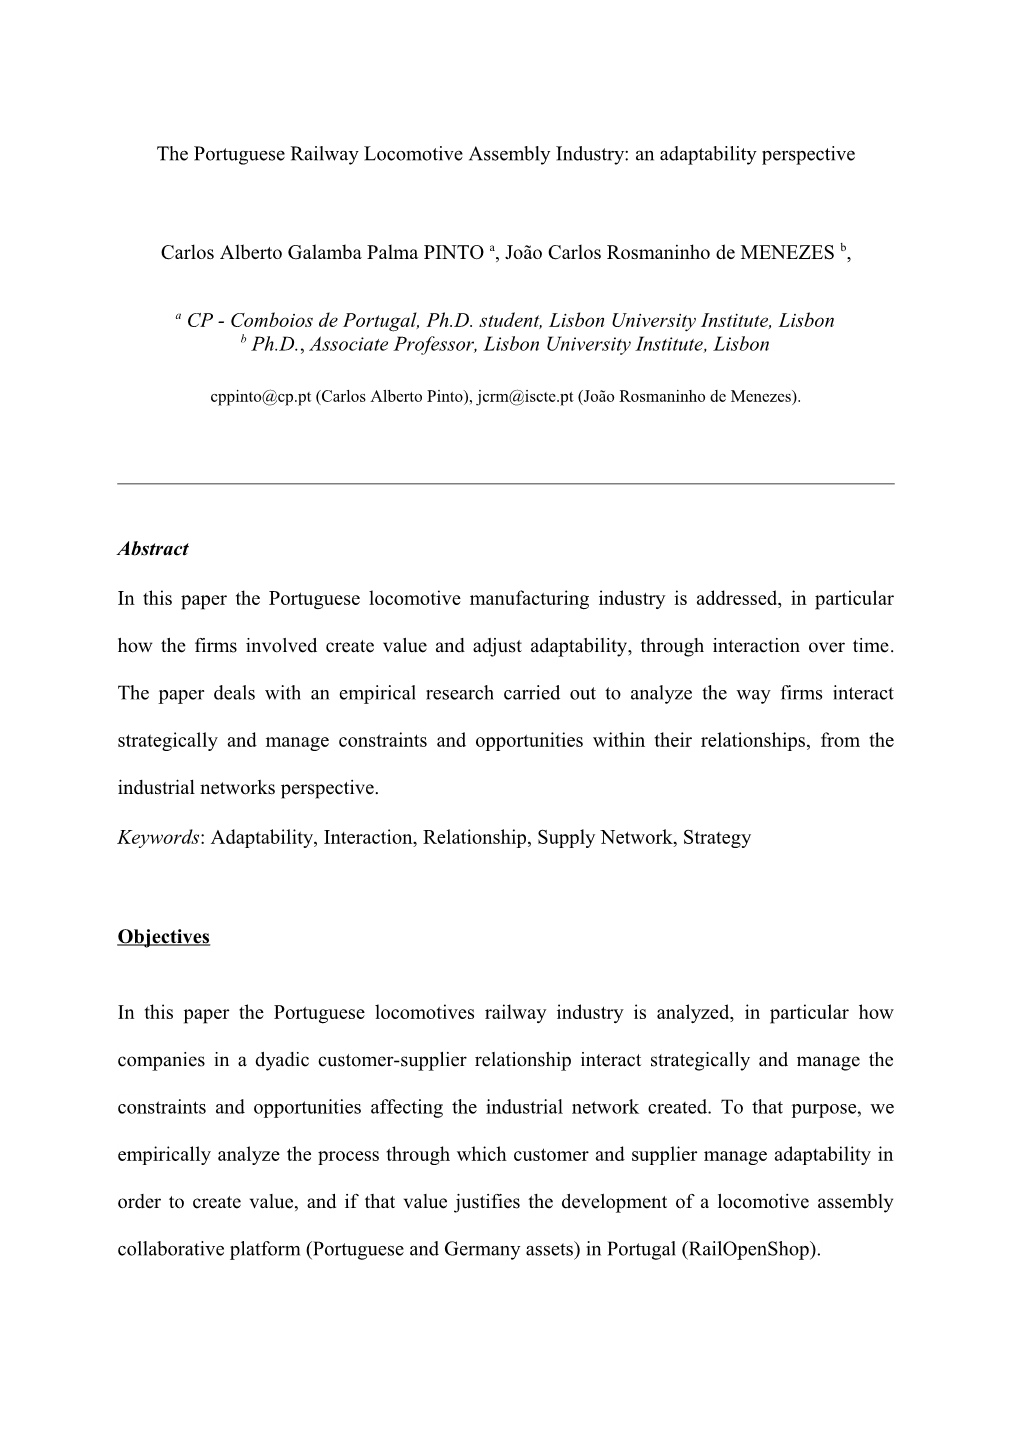 The Portuguese Locomotive Railway Assembly Industry: a Network Perspective *